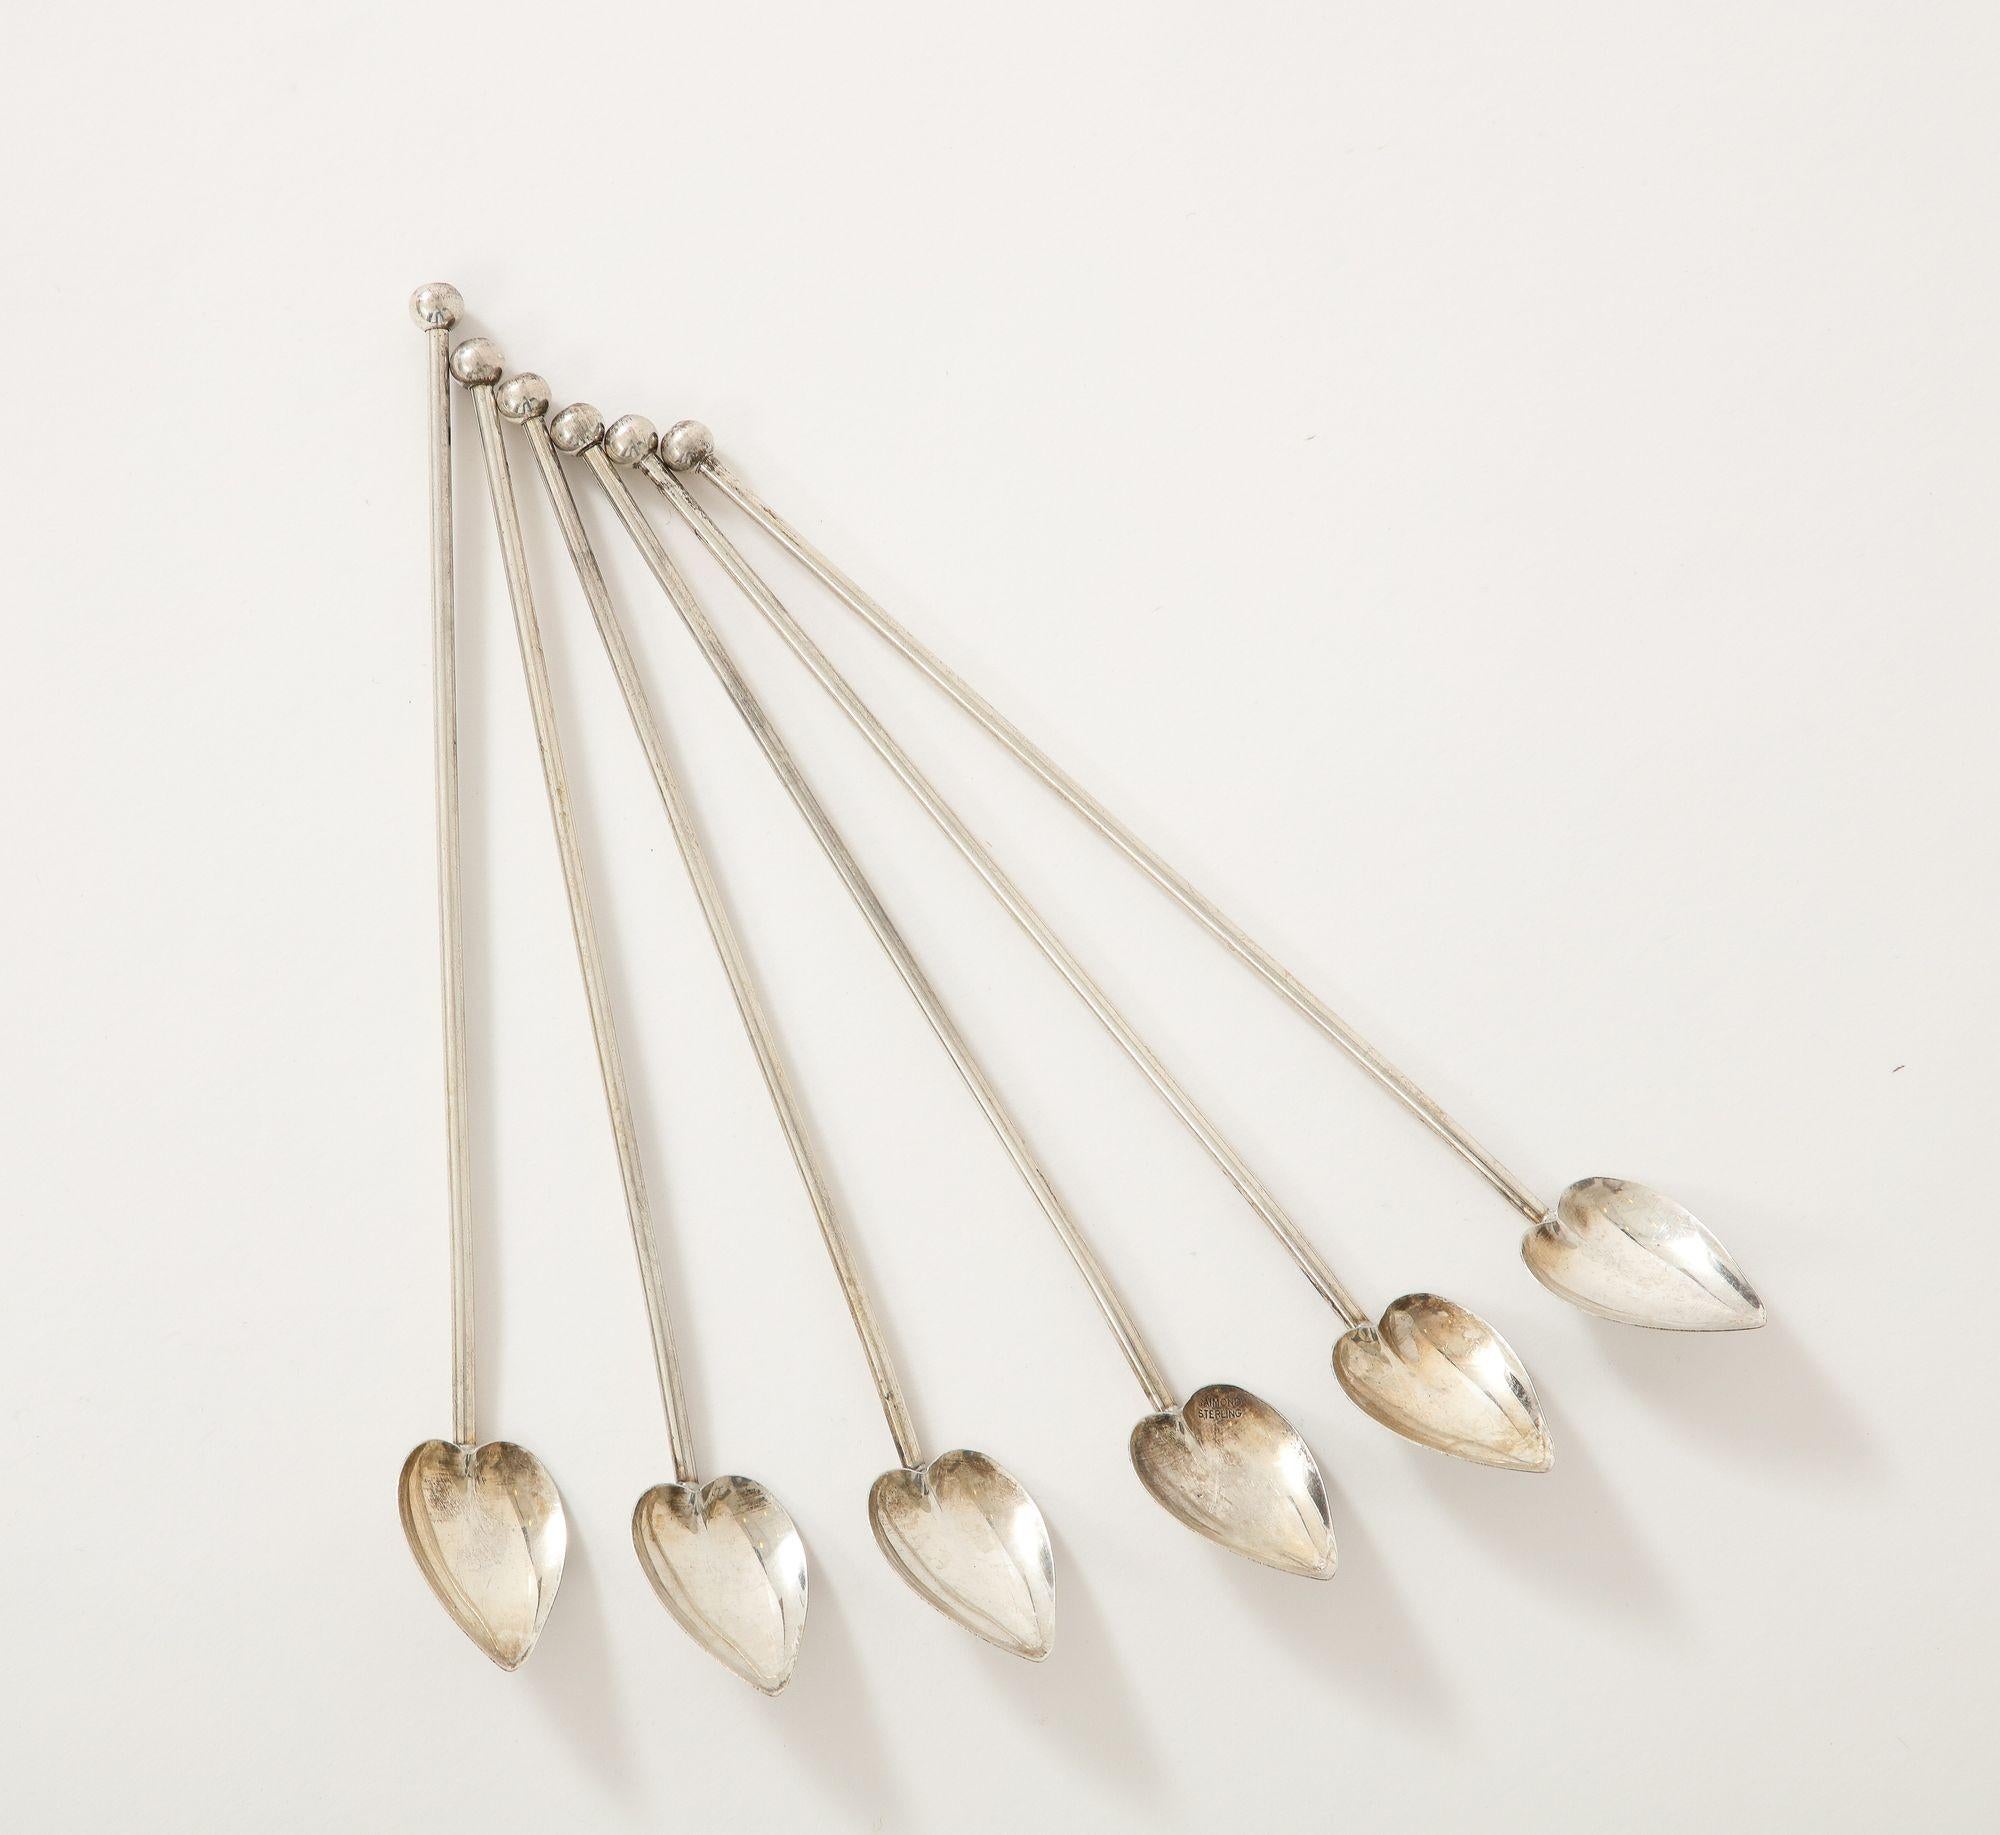 A set of 6 practical sterling silver heart shaped cocktail spoons/straws. These stirrers are a great complement to any cocktail party.